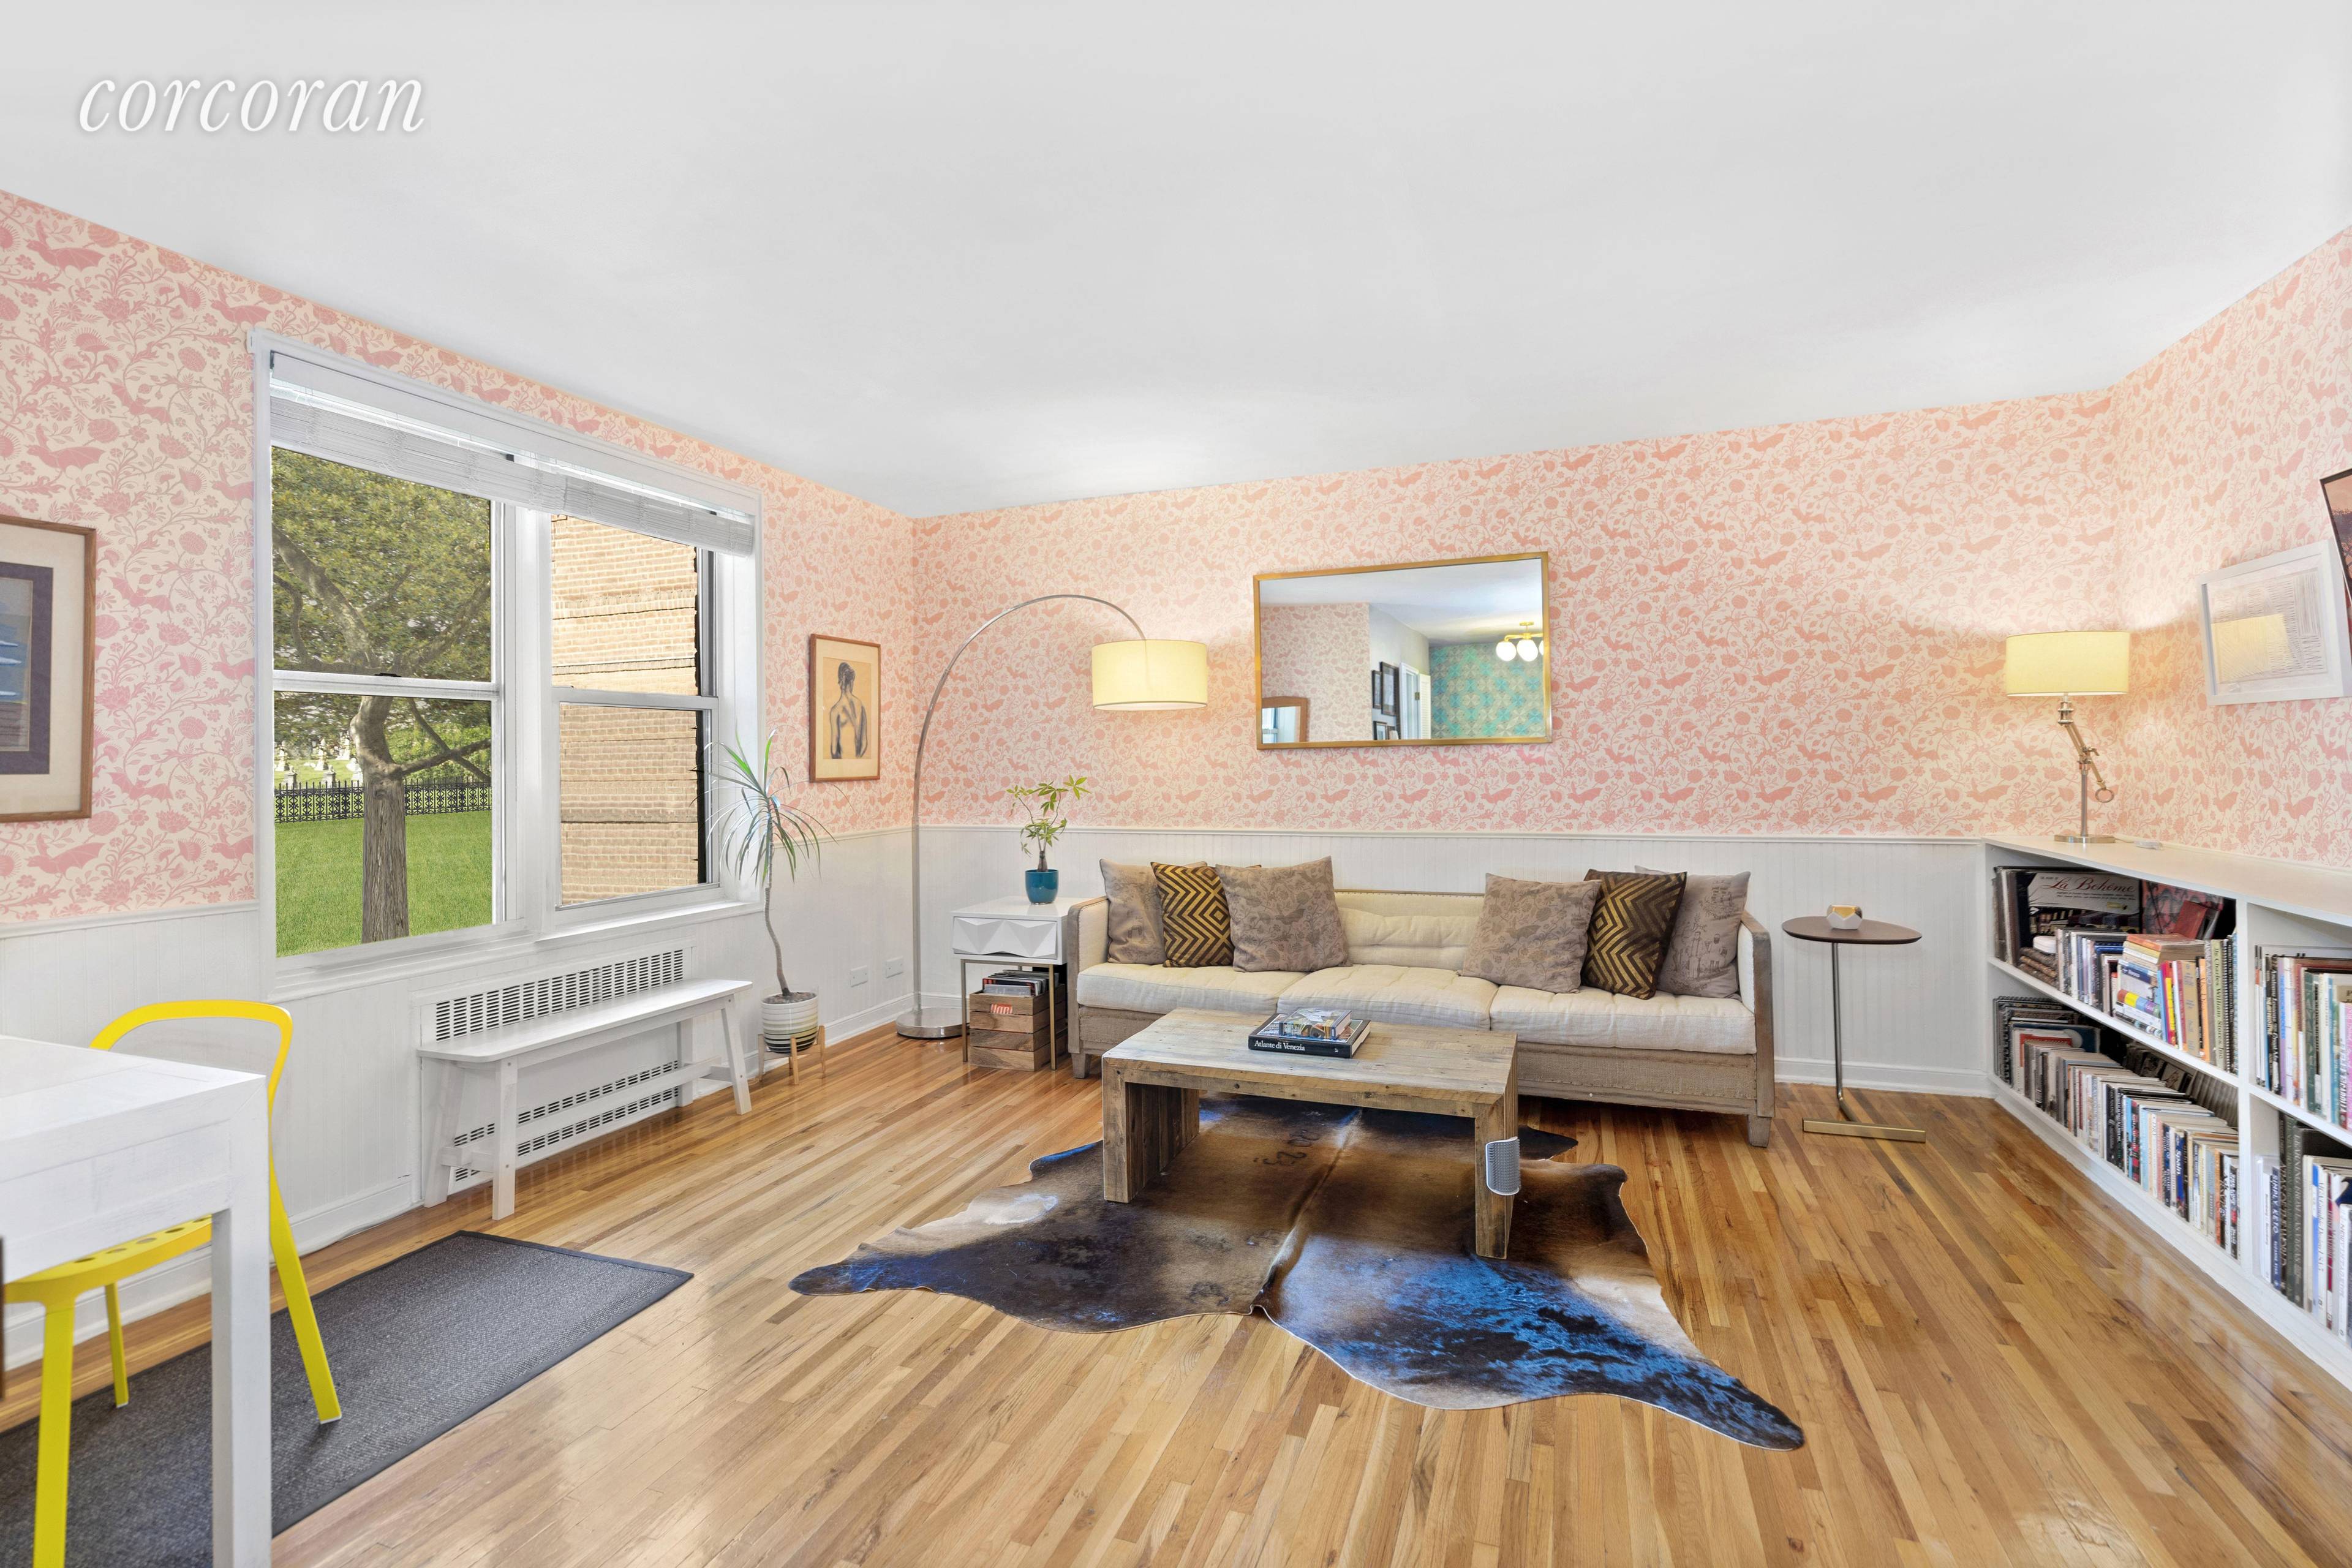 This gorgeous 1 bedroom co op in Windsor Terrace is large, renovated and airy and was just featured in the New York Times On the Market column.